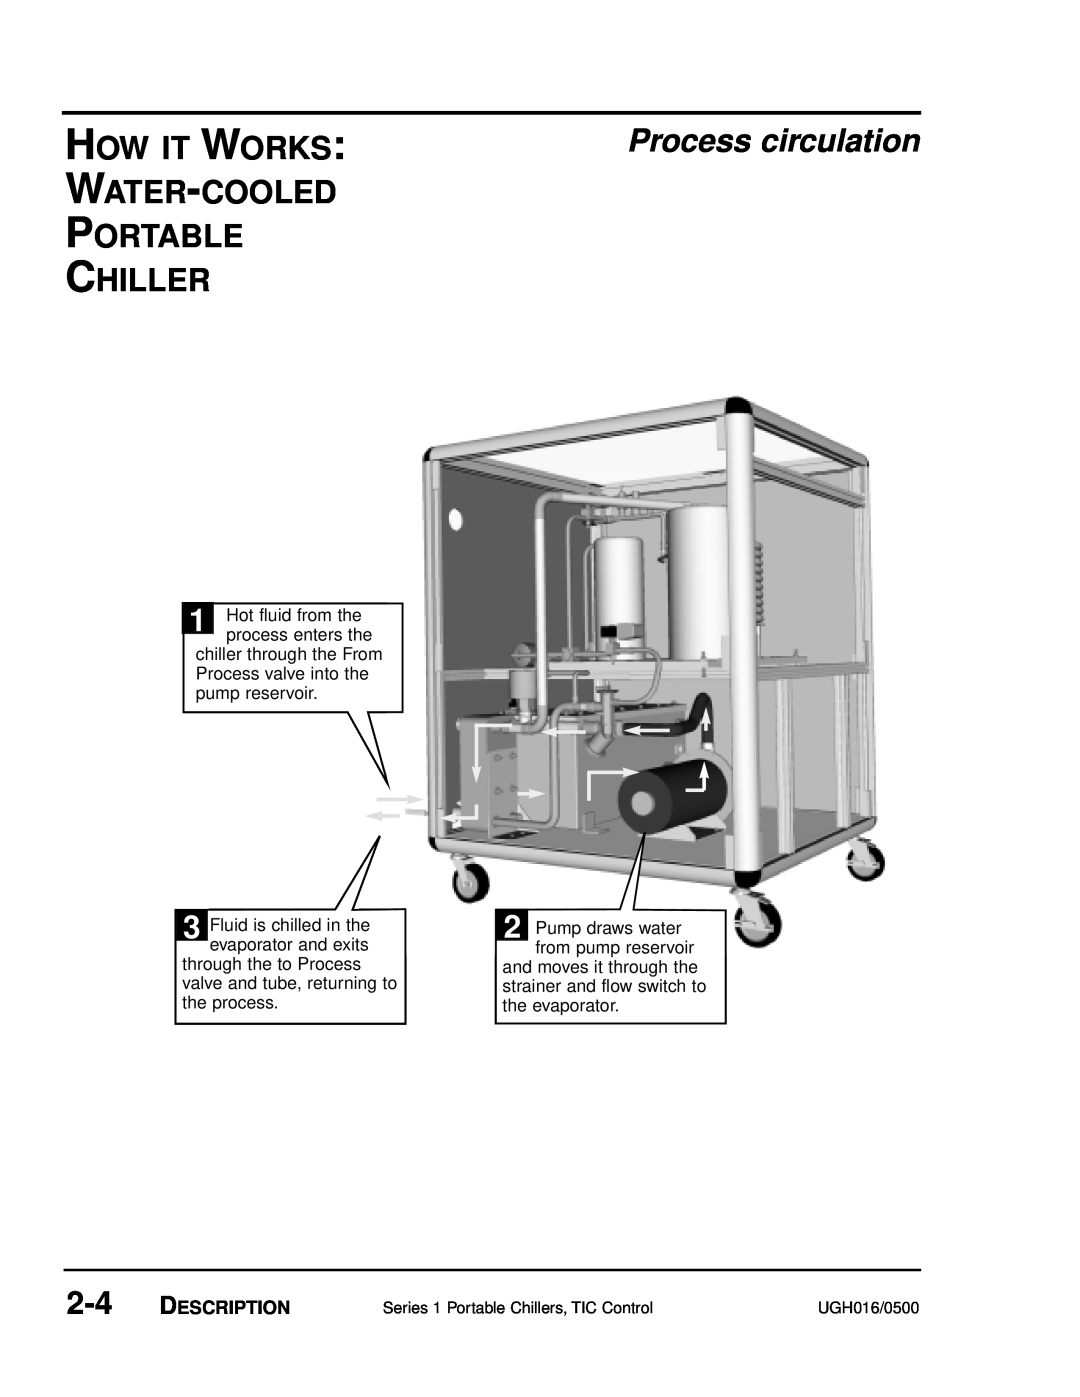 Conair UGH016/0500 manual How It Works Water-Cooled Portable Chiller, Process circulation, Description 